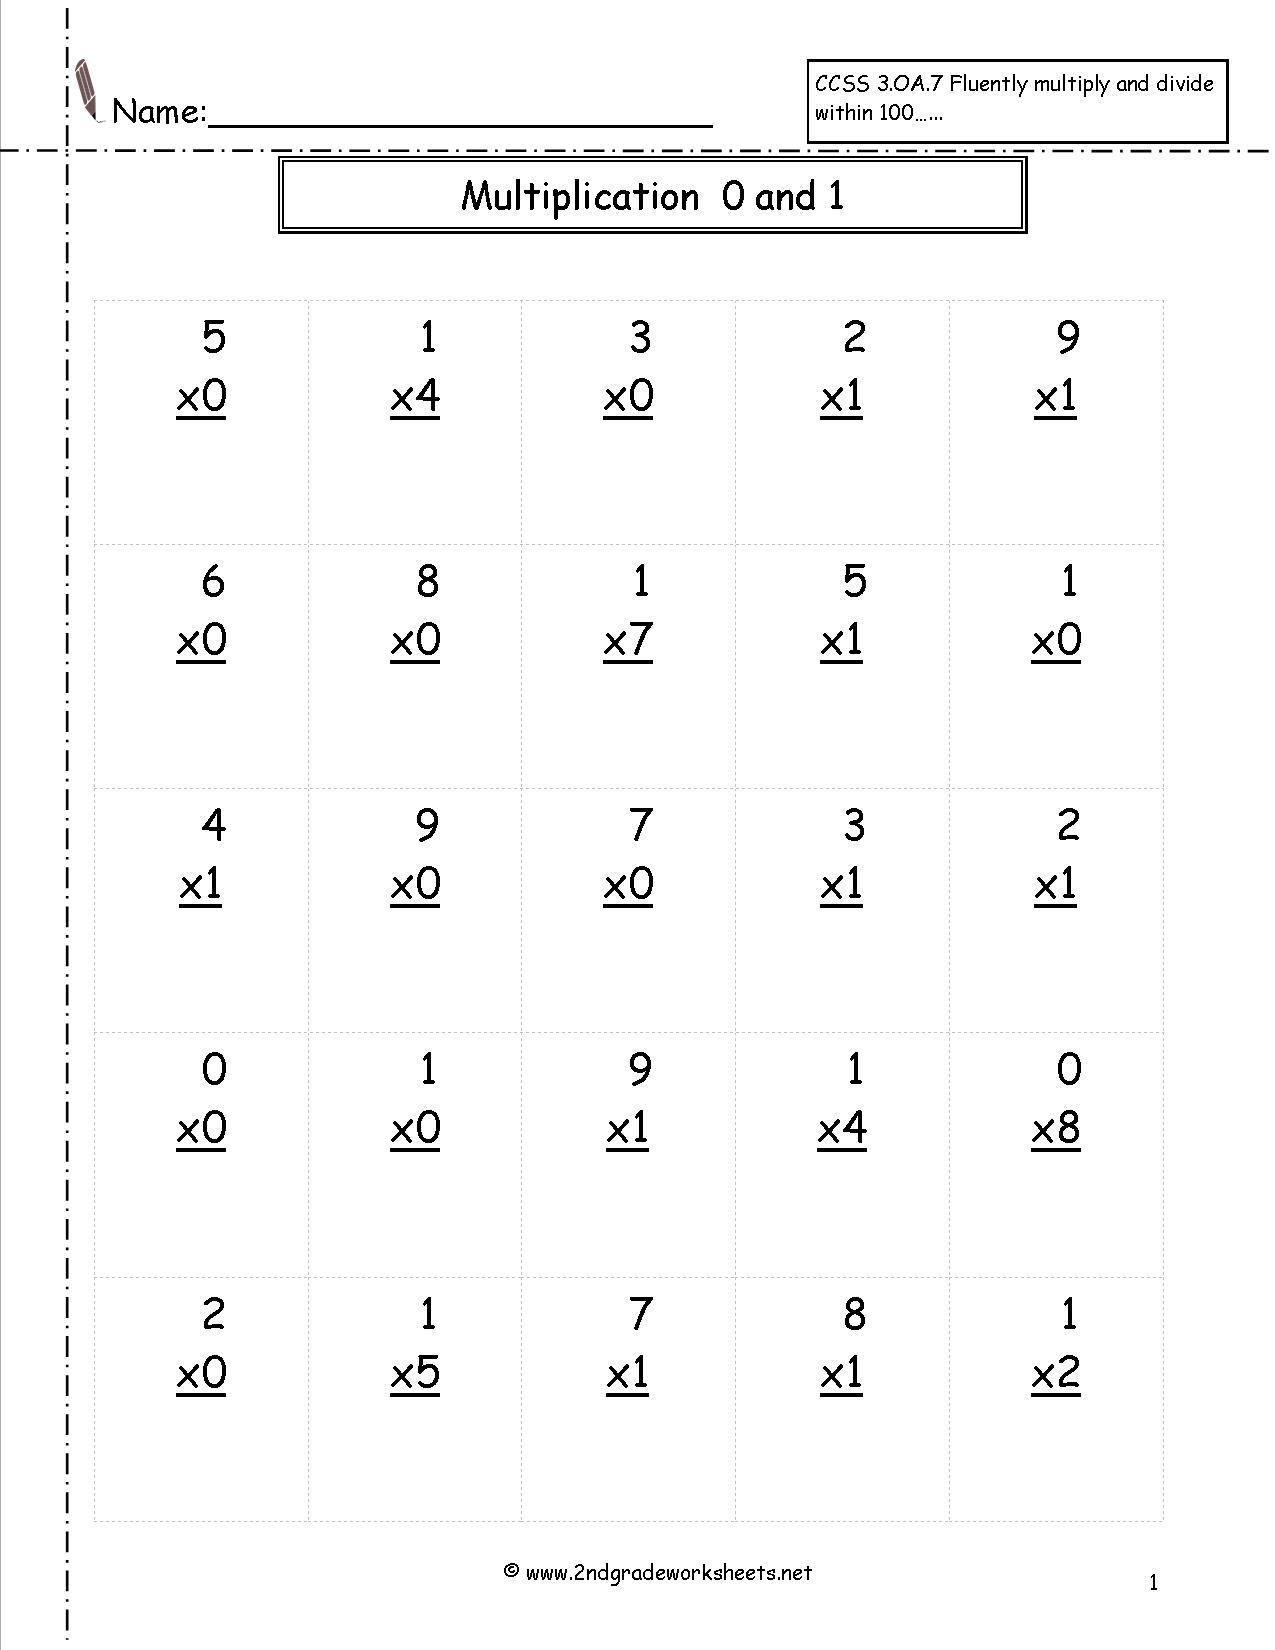 Multiplication Worksheets And Printouts within Printable Multiplication Sheets